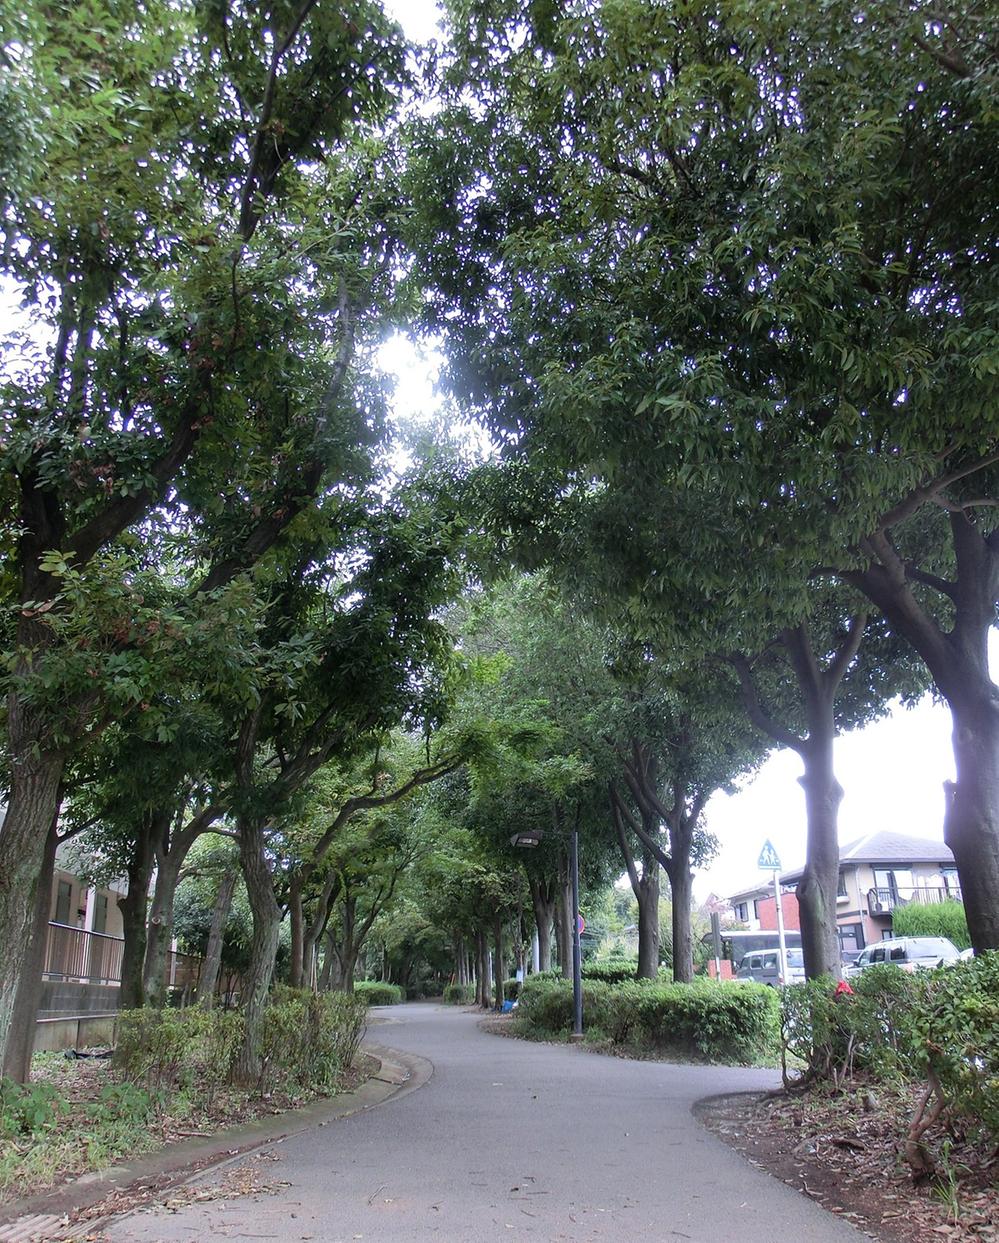 Streets around. Lush surrounding environment. It has also been used as a walk course and school road of pet.